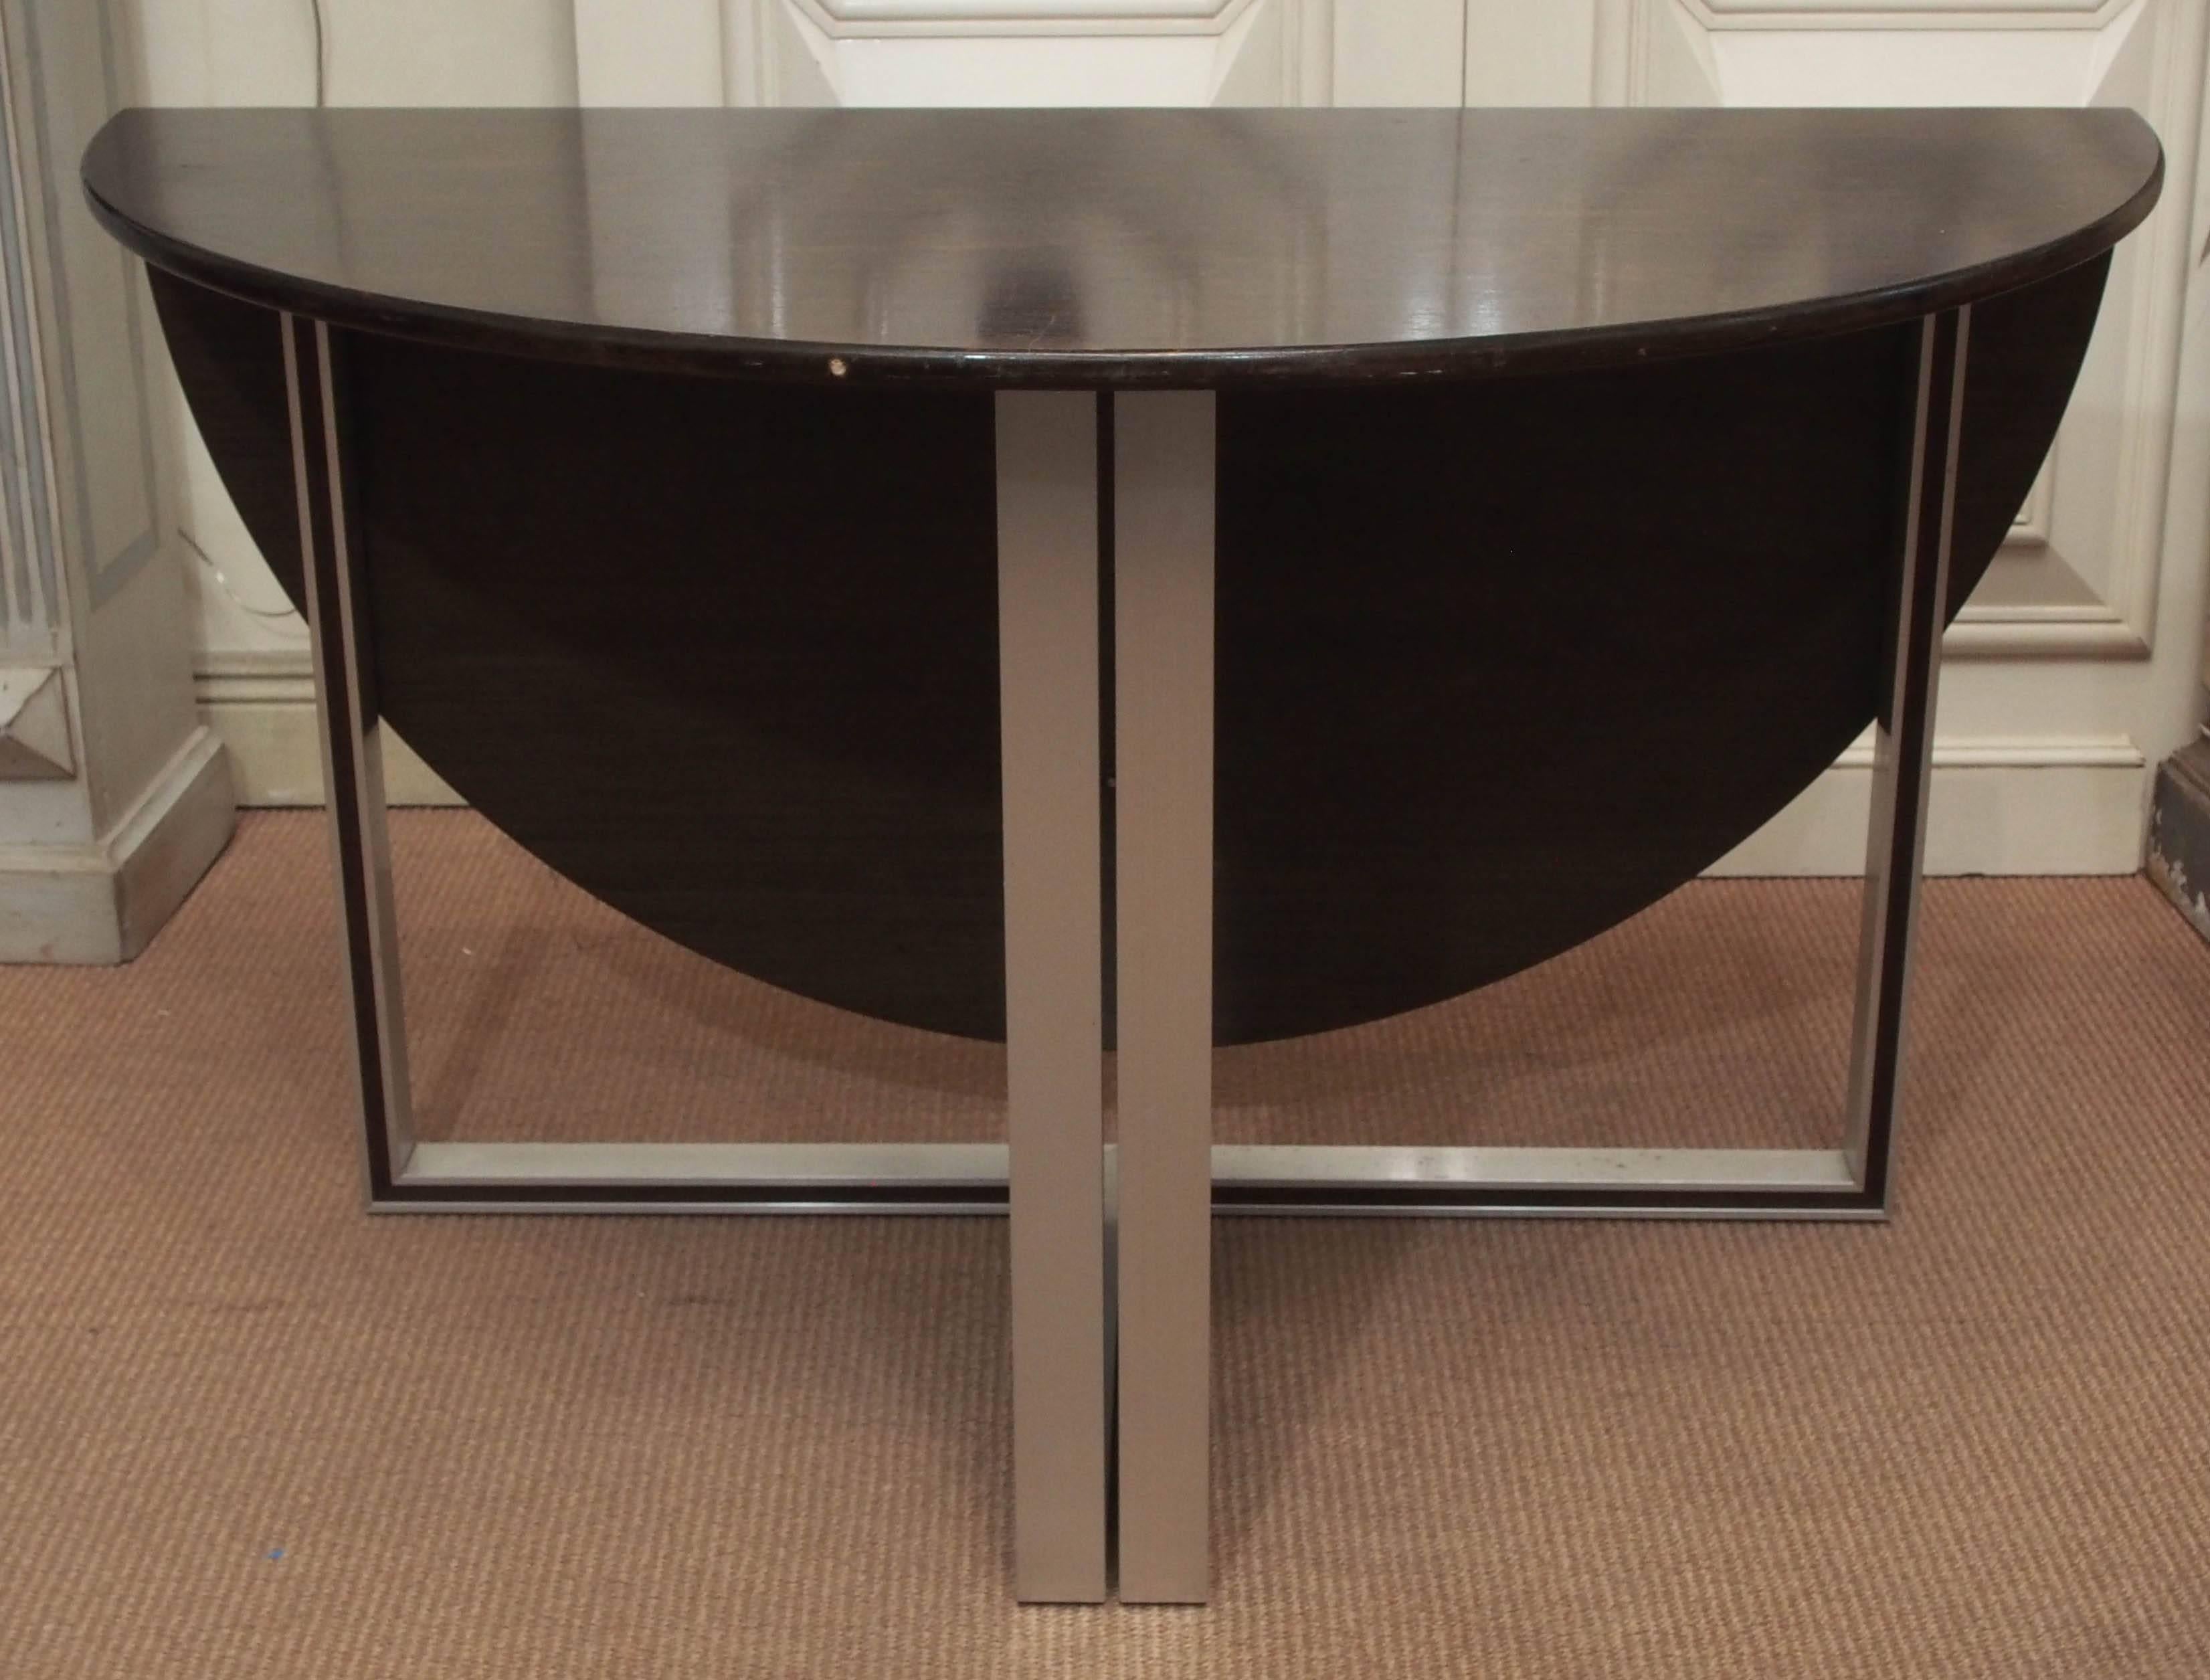 A beautiful modern circular table with a folding leaf and metal legs. The table can be flush with a wall or set as a standalone piece. Its versatility would make it a great addition to any space.